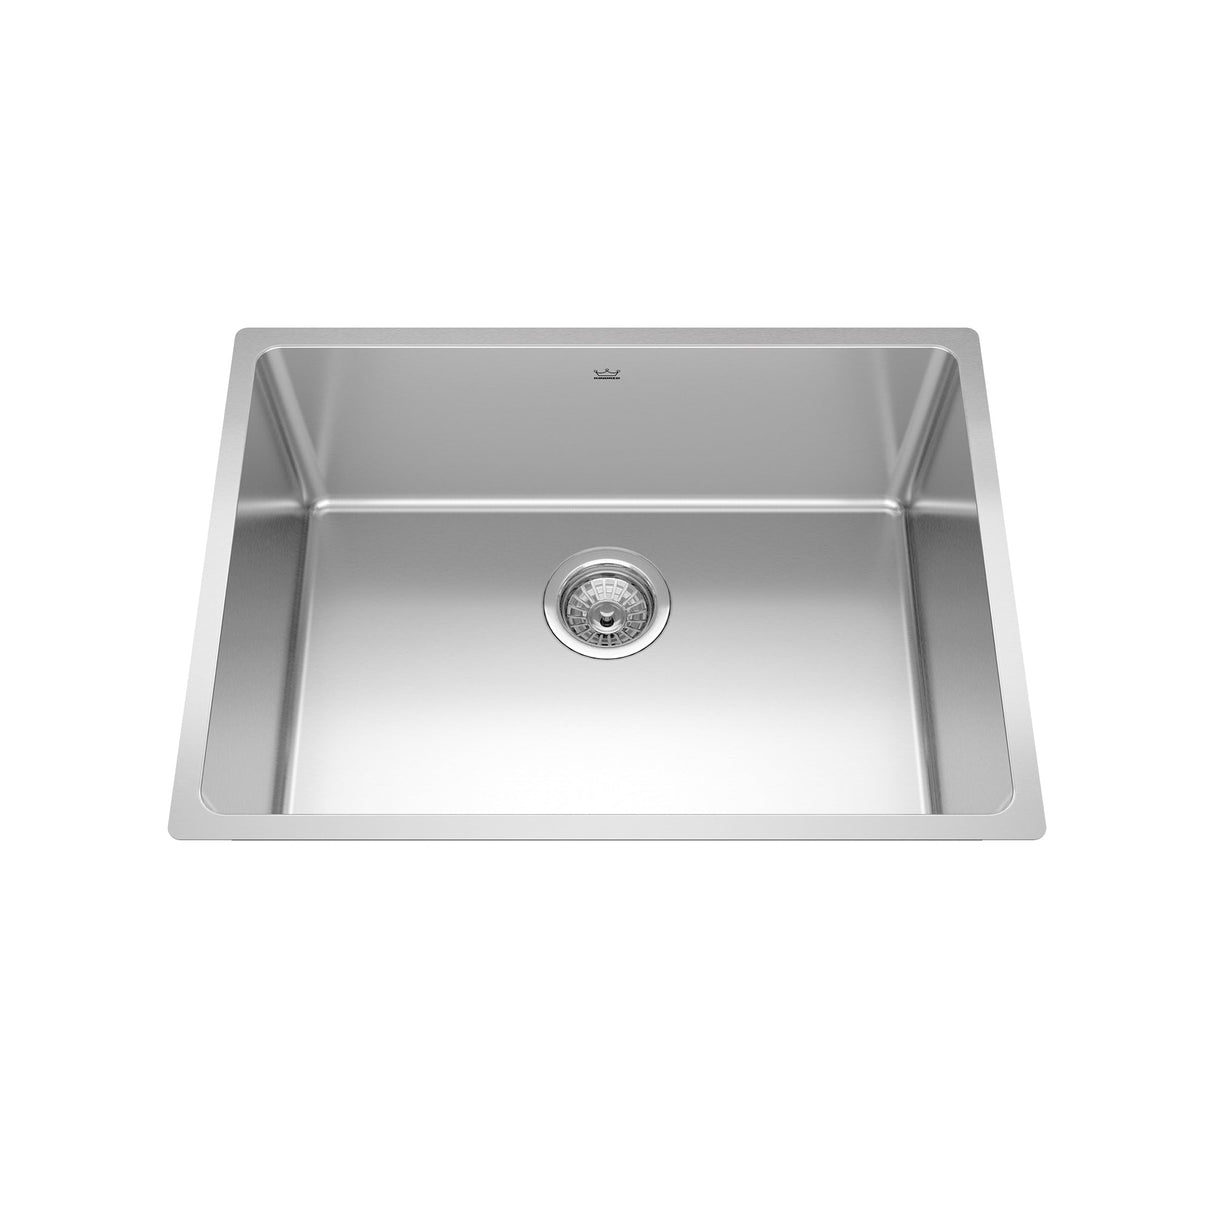 KINDRED BSU1825-9N Brookmore 24.7-in LR x 18.2-in FB x 9-in DP Undermount Single Bowl Stainless Steel Sink In Commercial Satin Finish